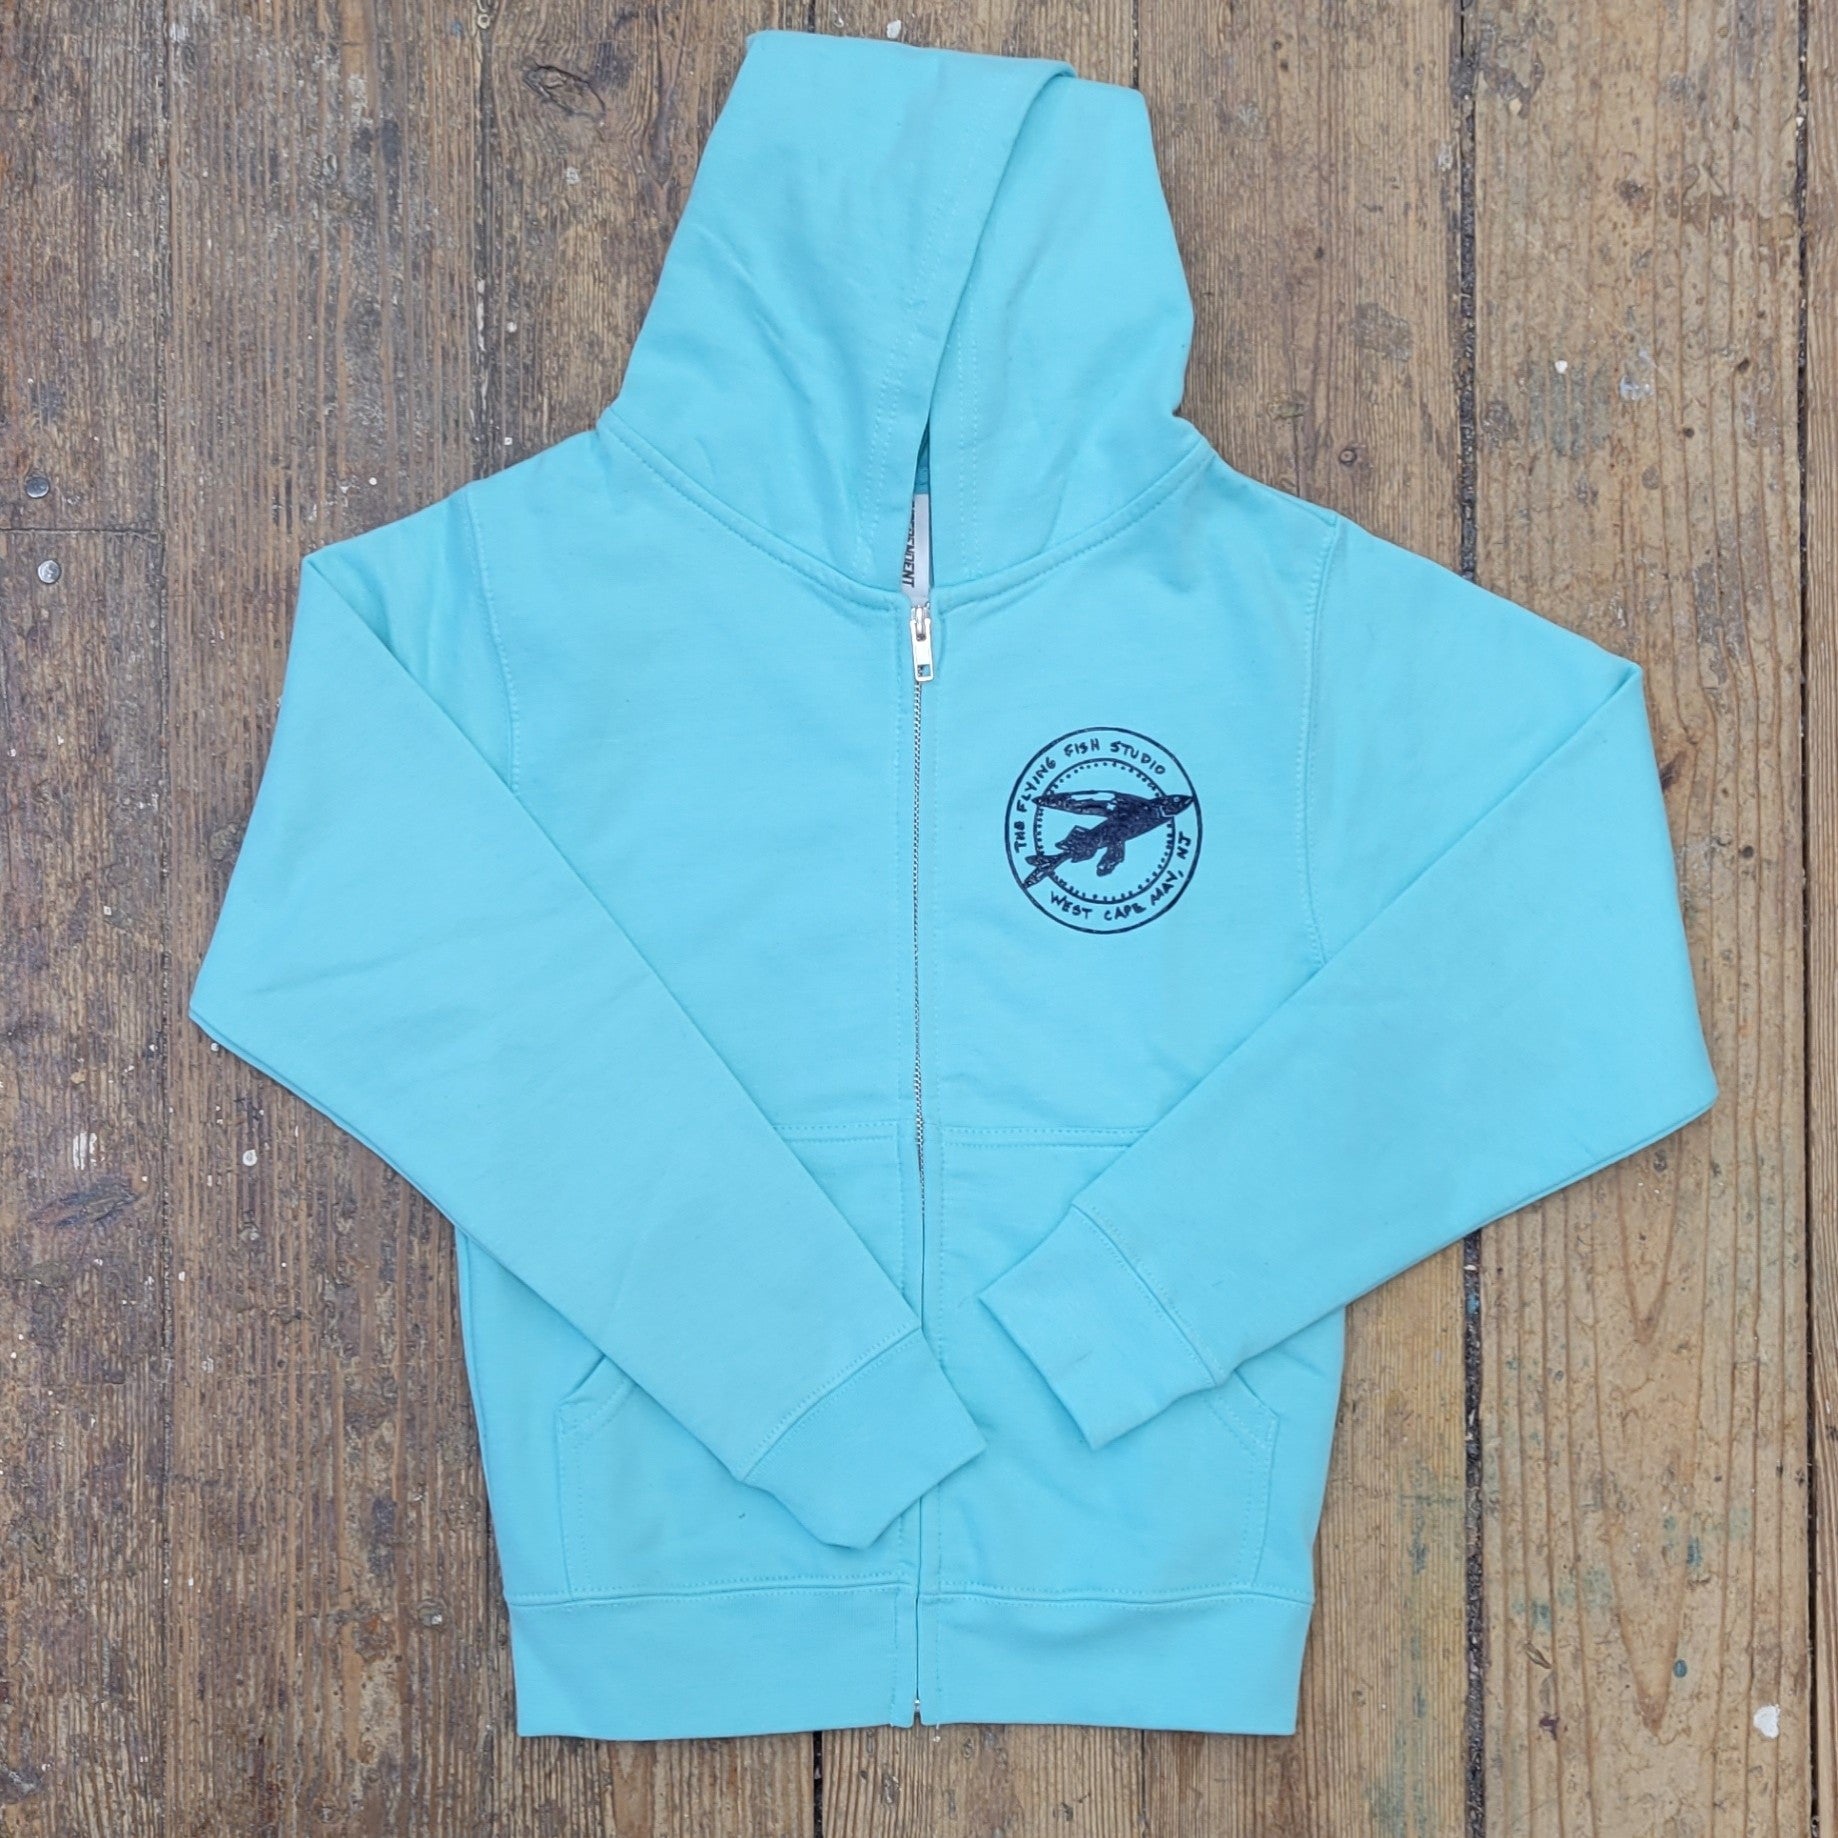 Aqua Blue zip-up jacket featuring the 'Flying Fish' logo on the left chest in navy ink.